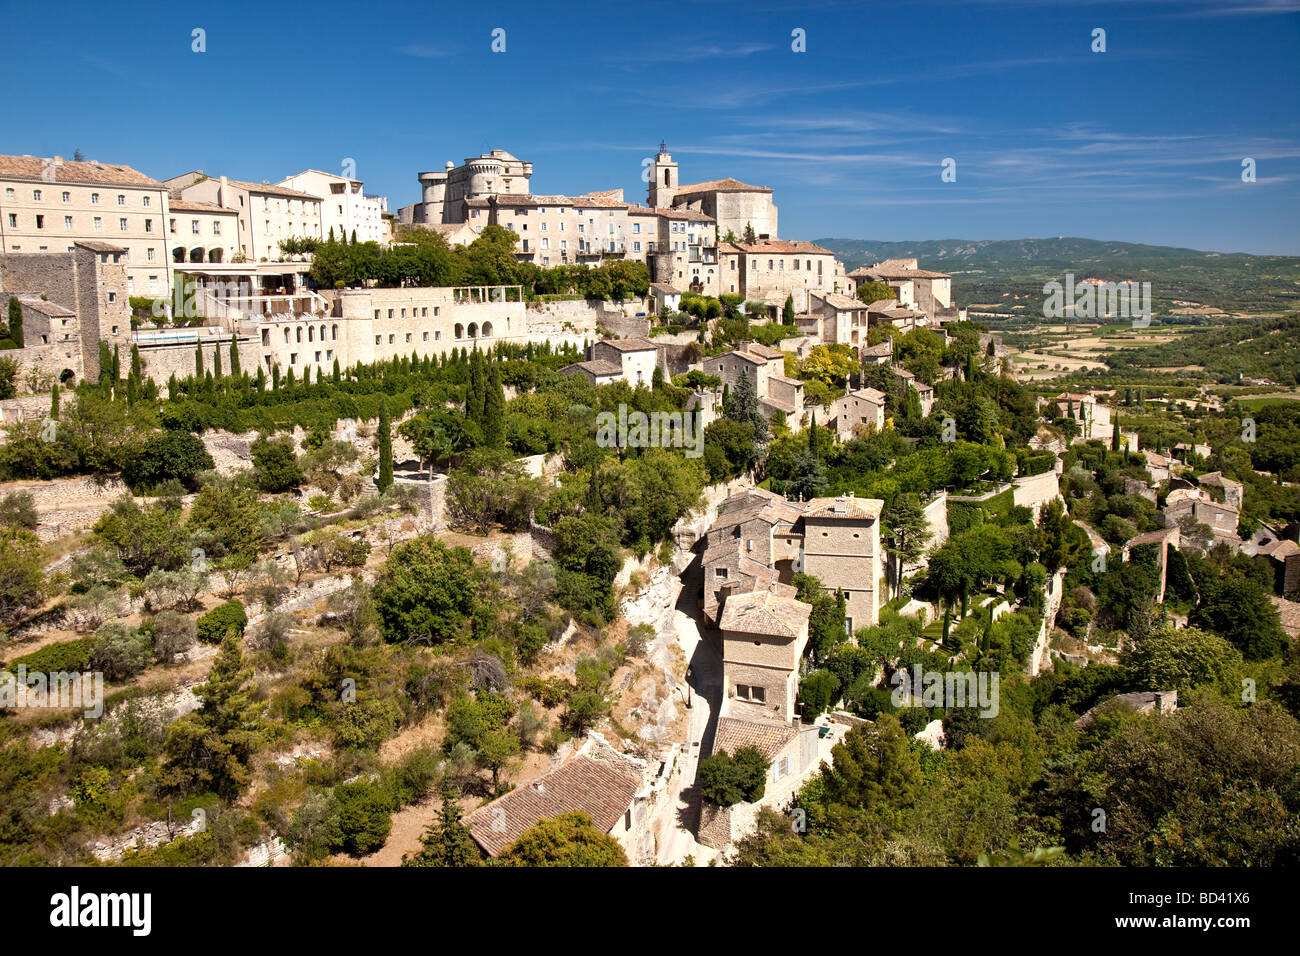 Hilltop town of Gordes, Provence France Stock Photo